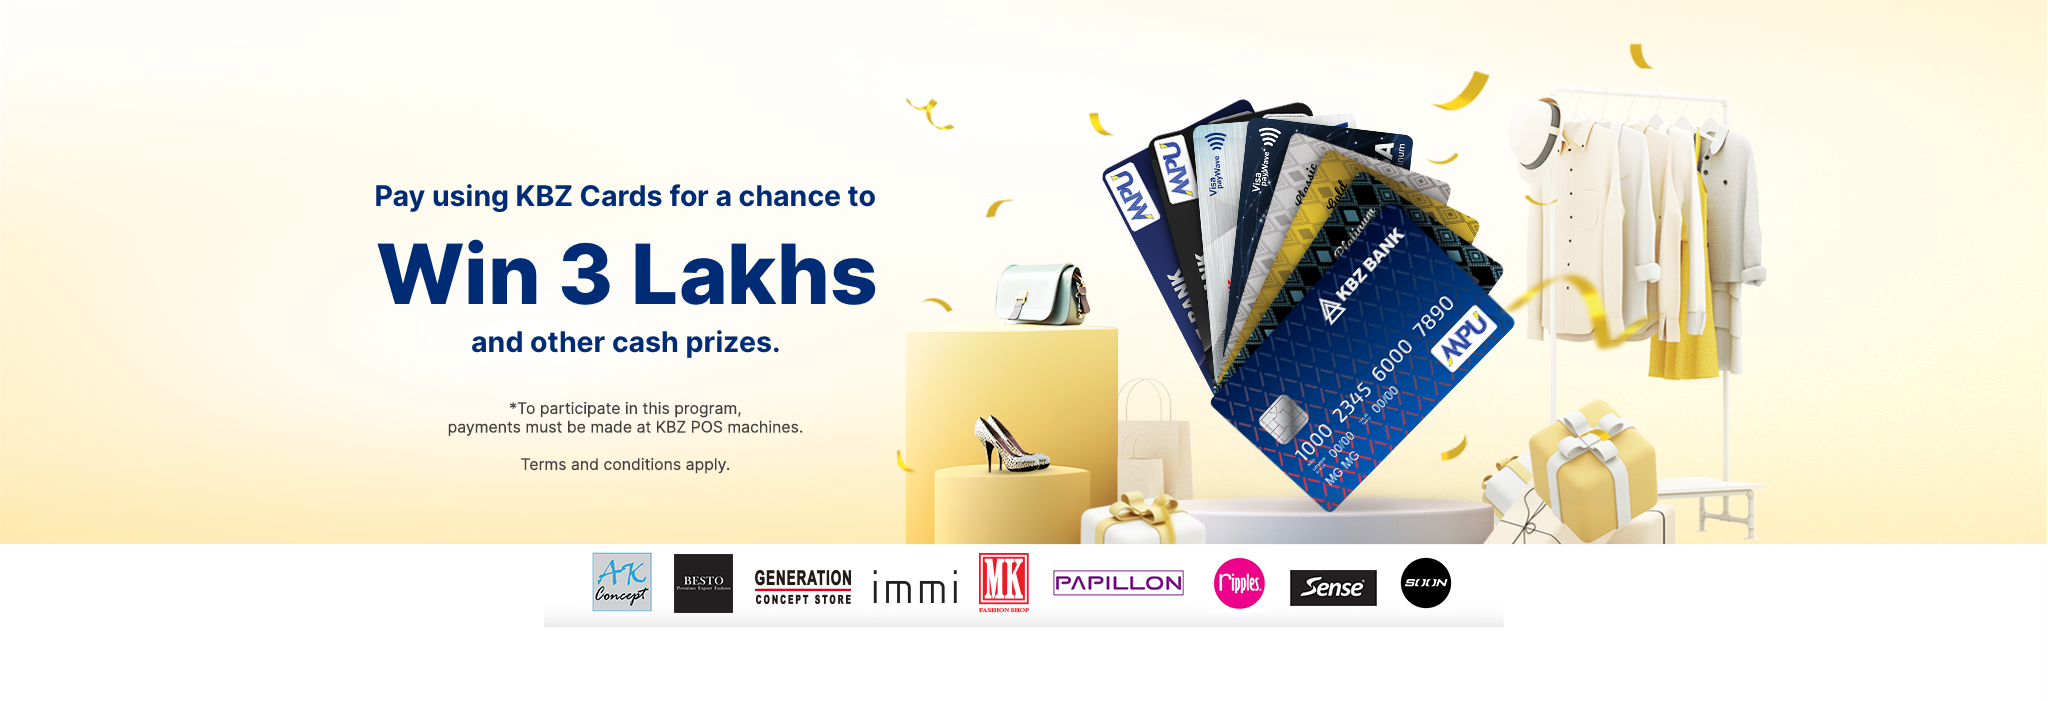 Pay using KBZ Cards for a chance to win 3 Lakhs and Other Cash Prizes